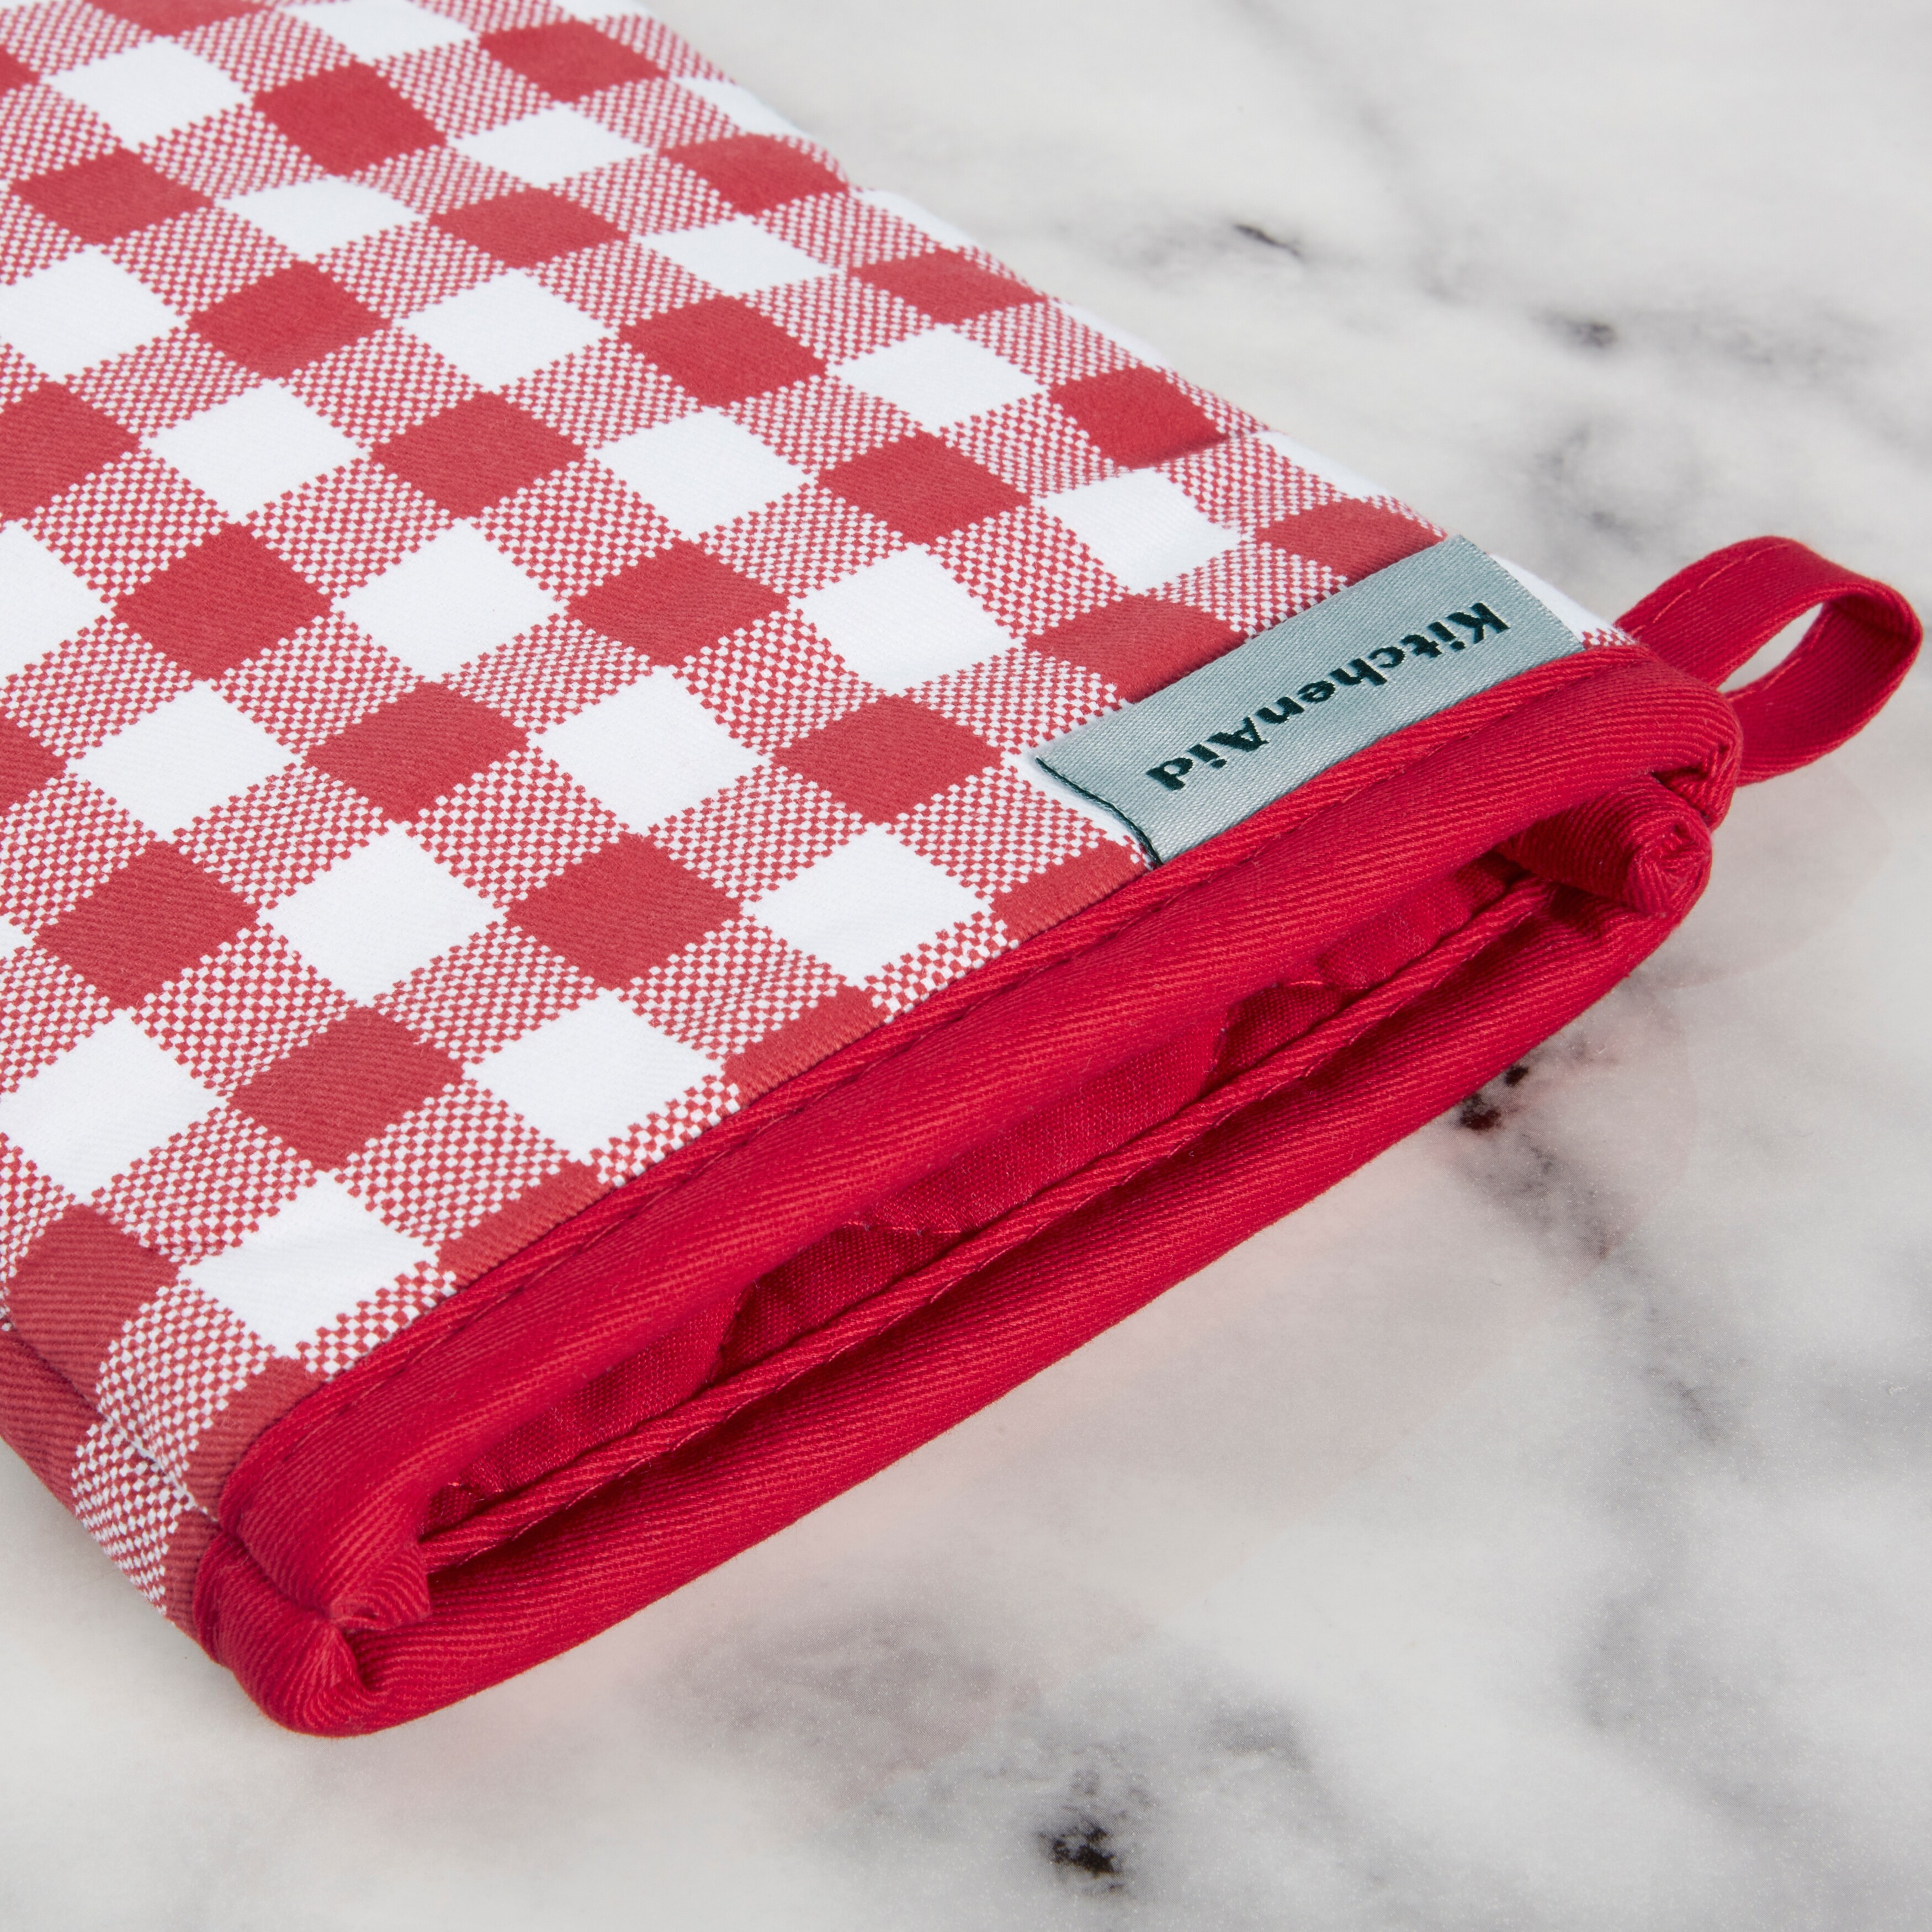 https://ak1.ostkcdn.com/images/products/is/images/direct/4b99e2e64ab2ee74ee260d68ee37c20cc9f4c41e/KitchenAid-Gingham-Oven-Mitt-2-Pack-Set.jpg